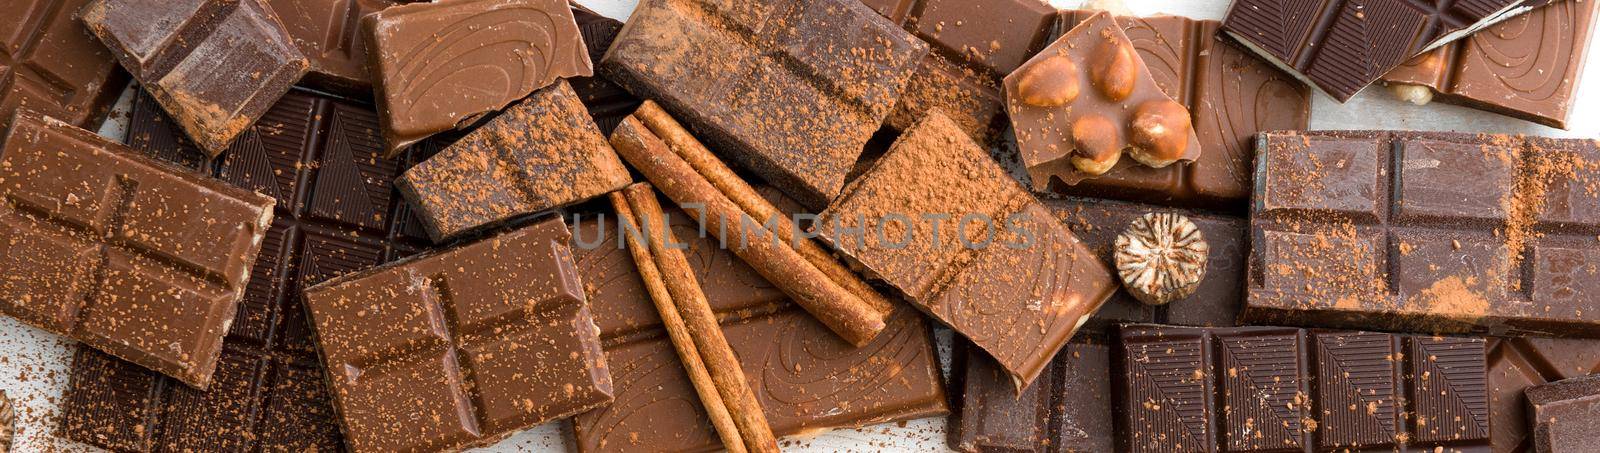 variety of chocolate on a wooden background with space for text